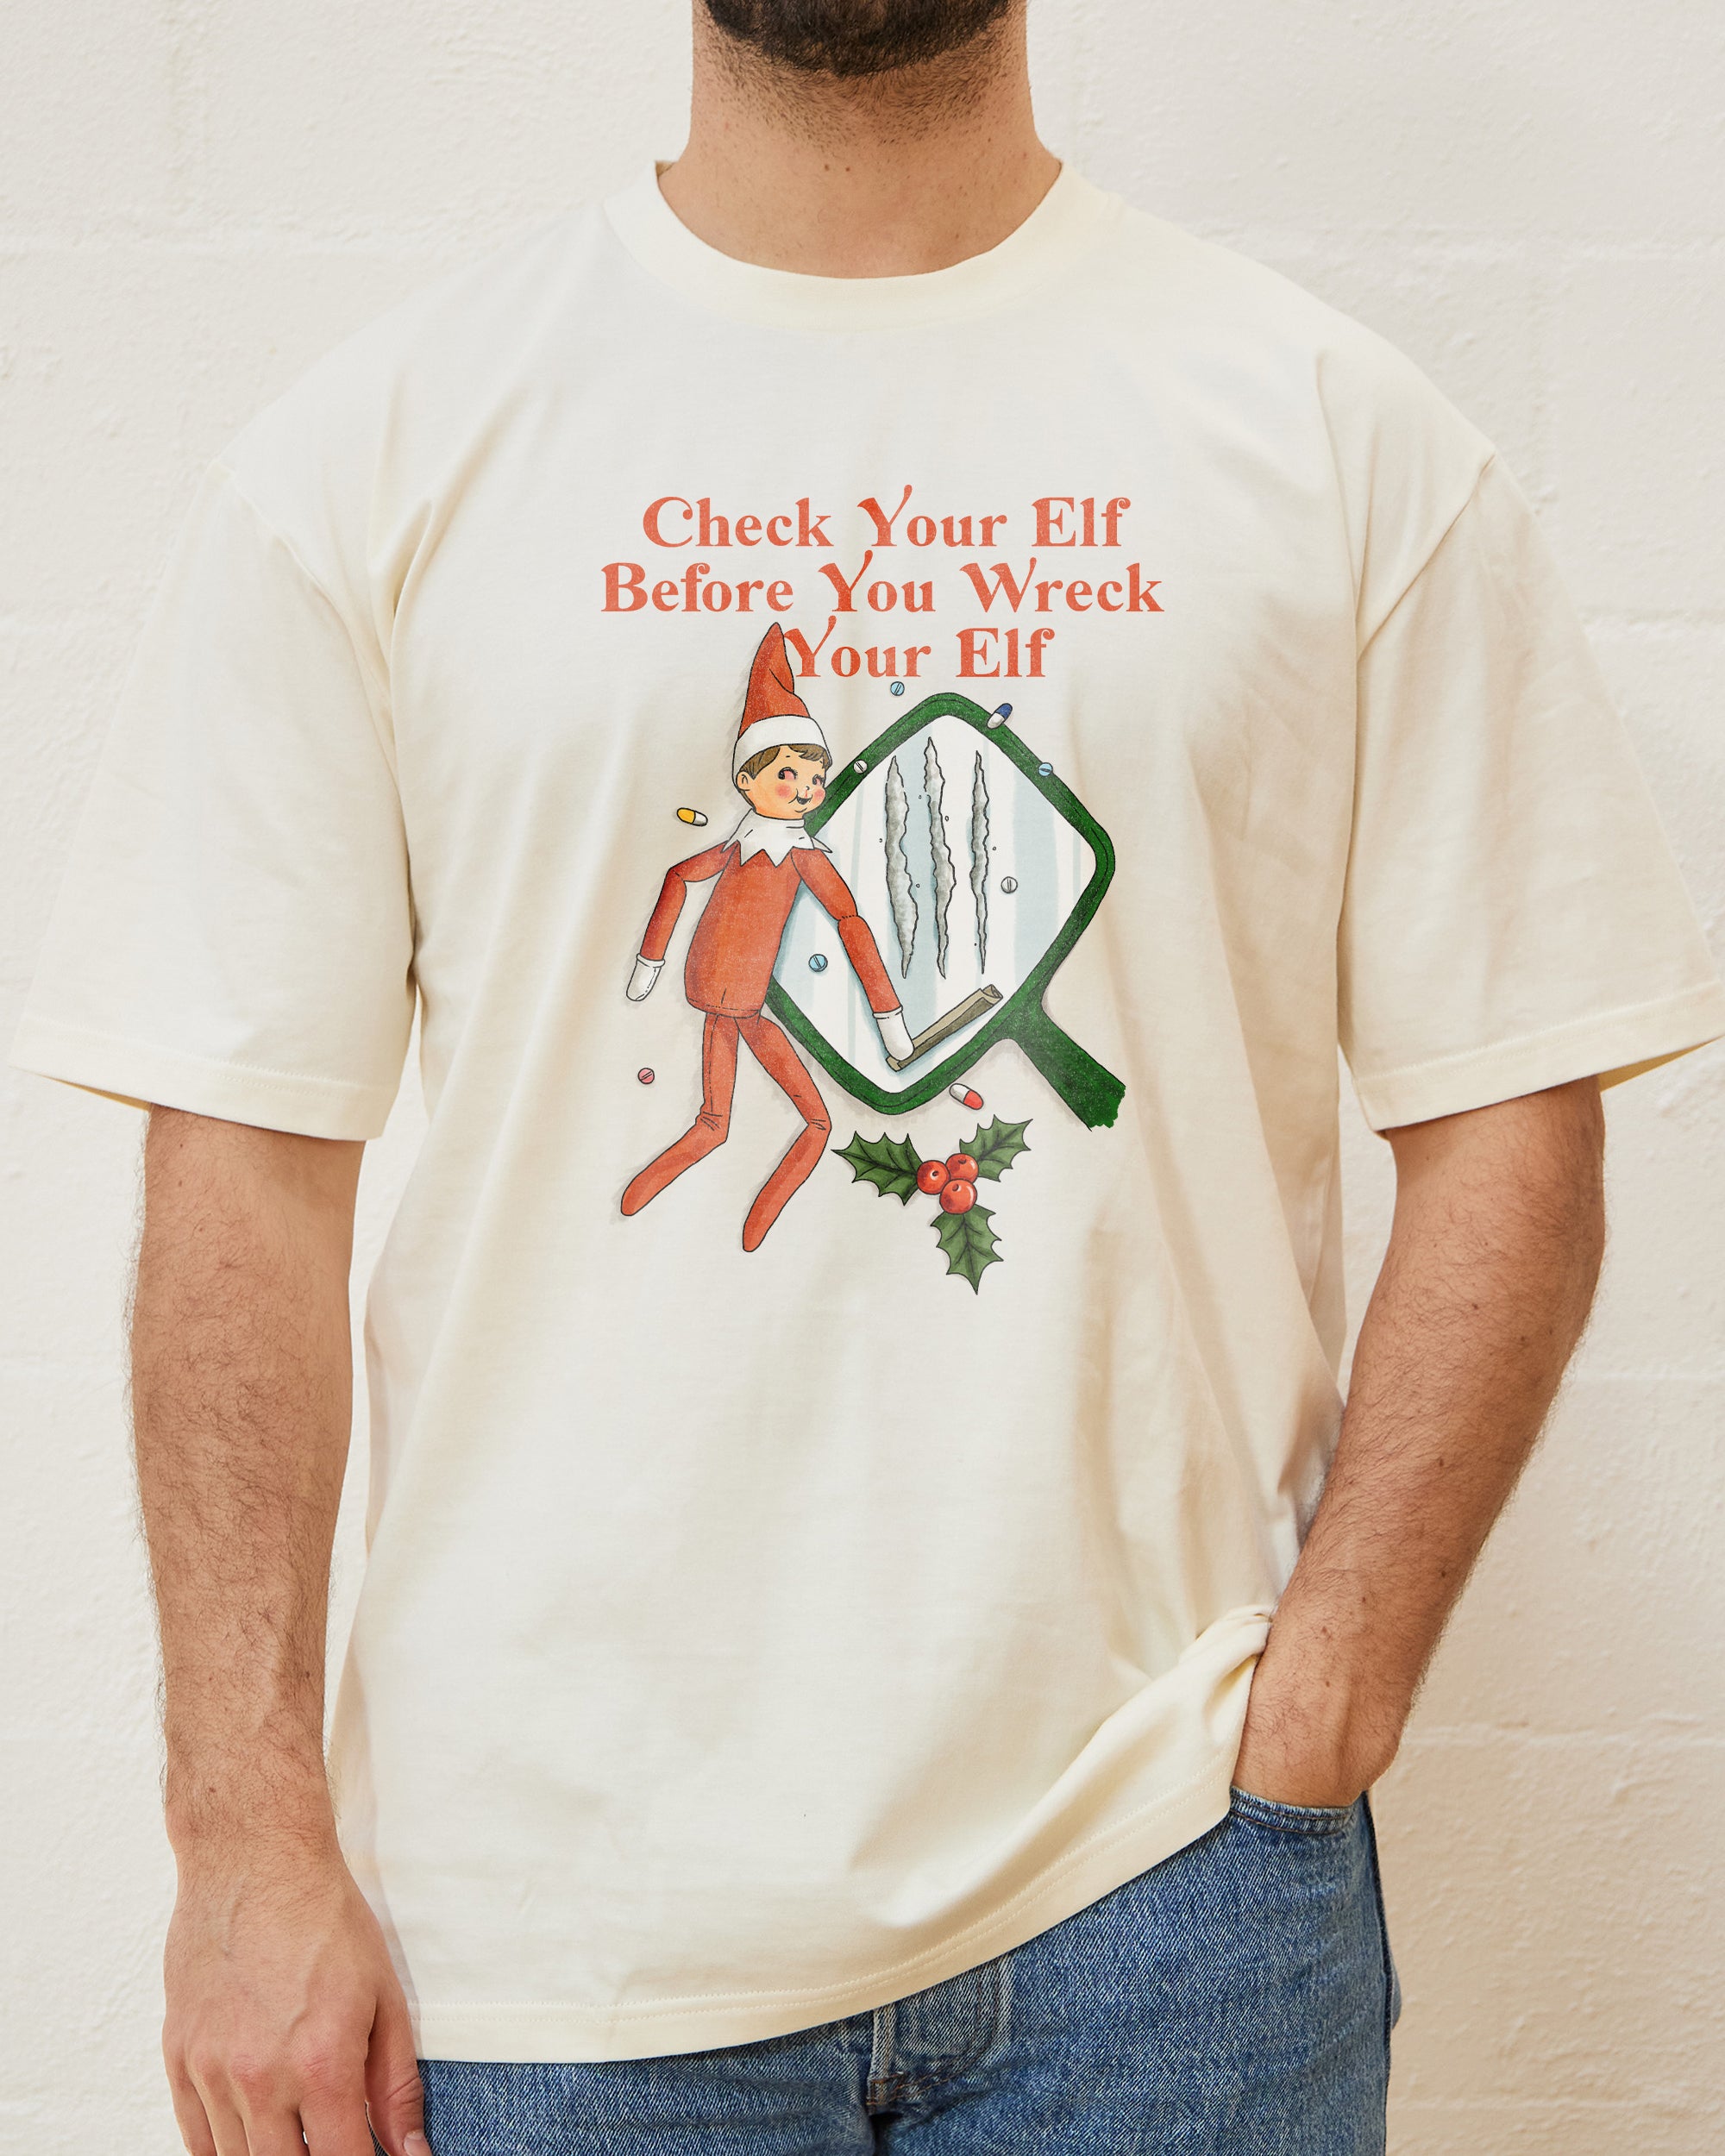 Check your Elf T-Shirt Europe Online Natural